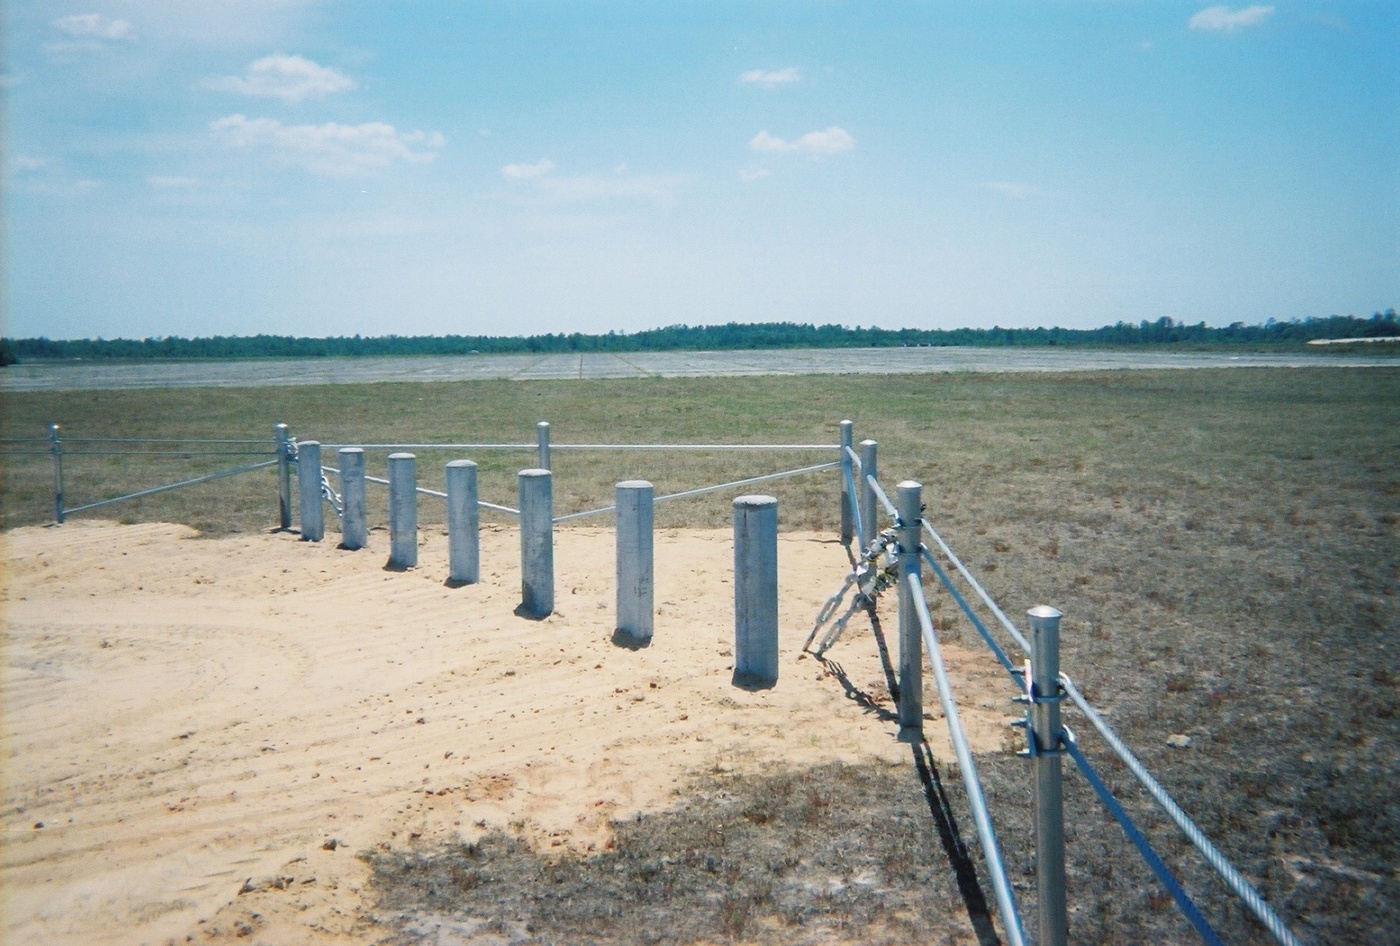 Cable Fencing Installed Around Construction Site